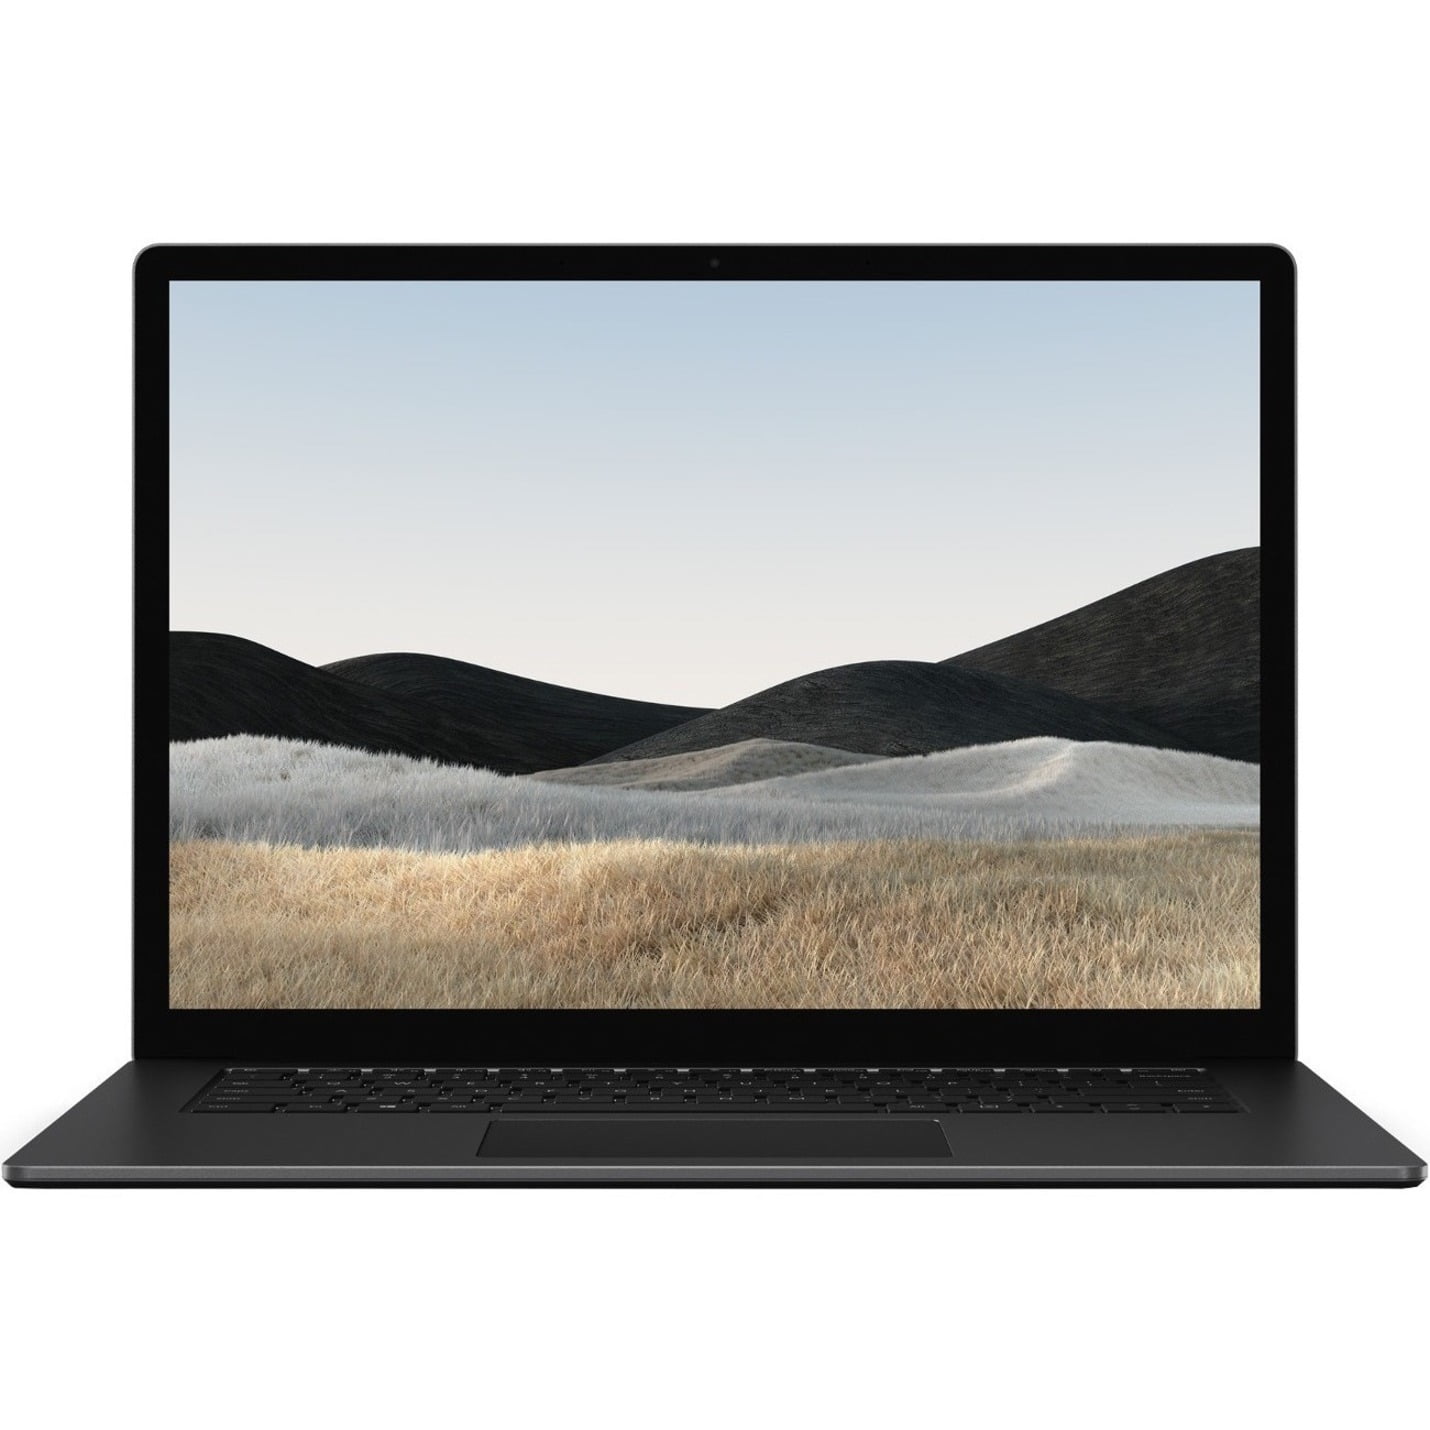 Microsoft – Surface Laptop 4 ” Touch Screen – Intel Core i7